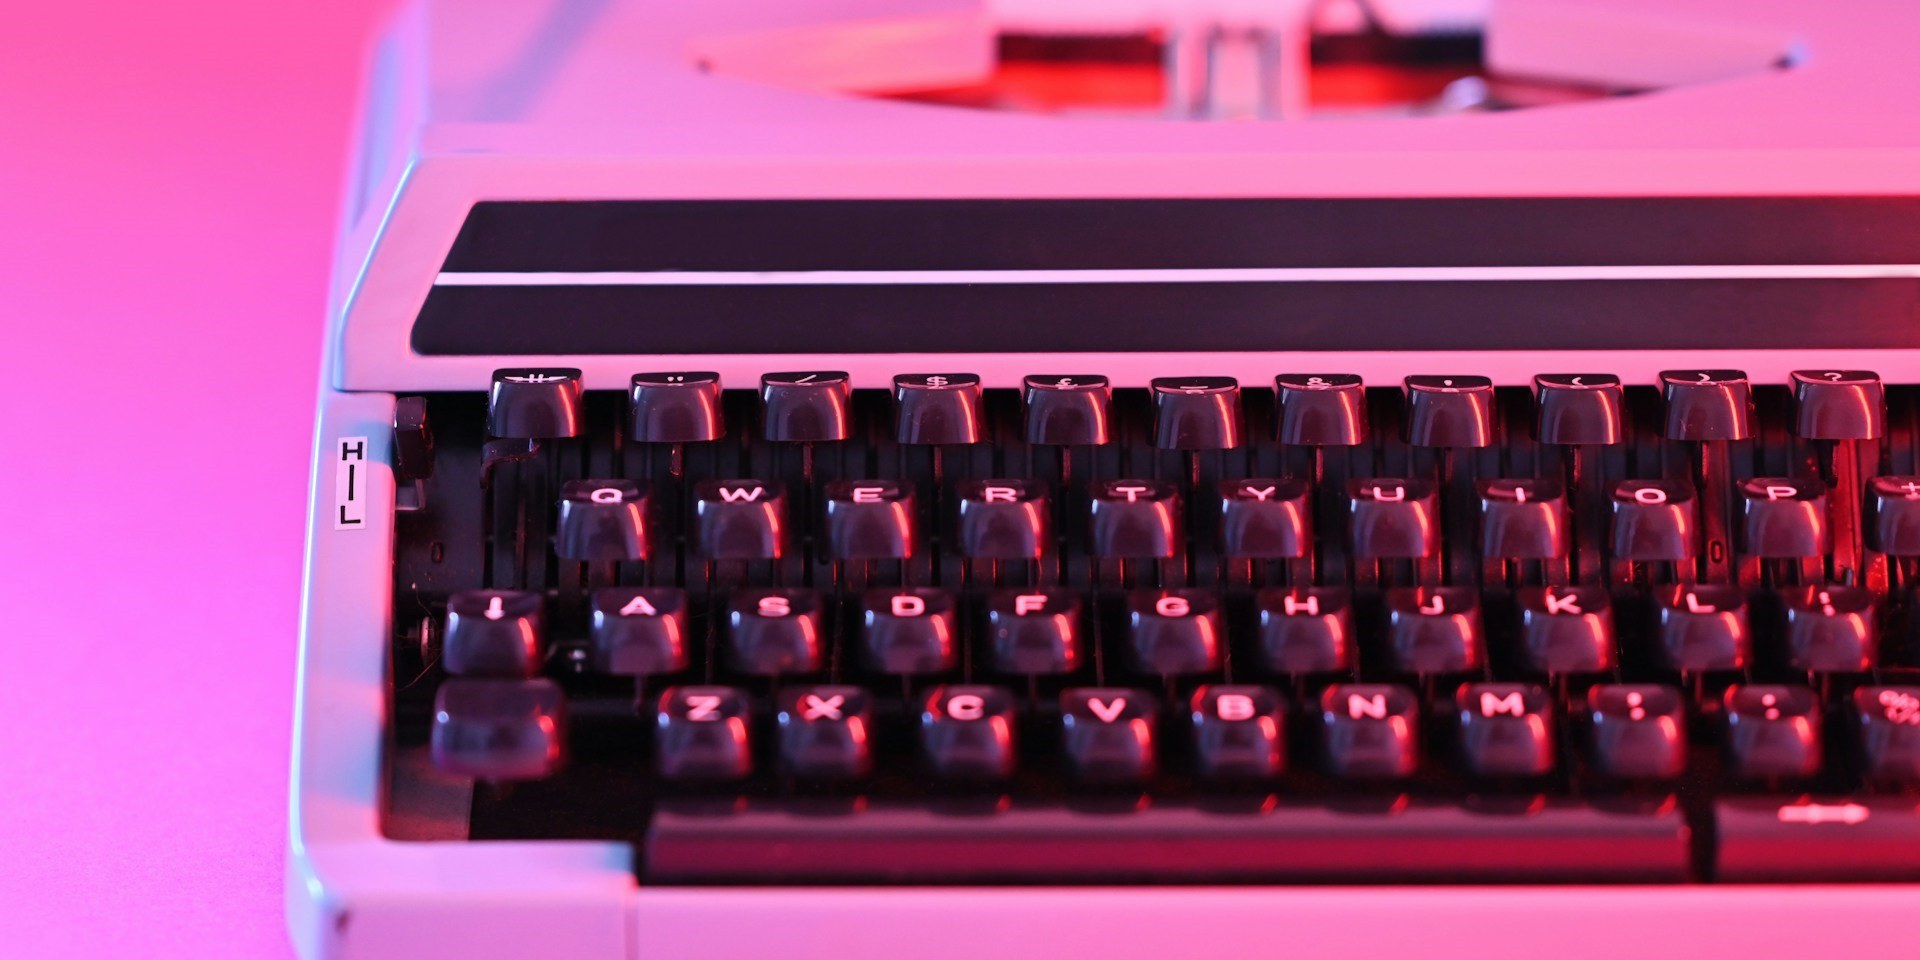 Exploring the Relevance of Typewriters in Today's Digital World